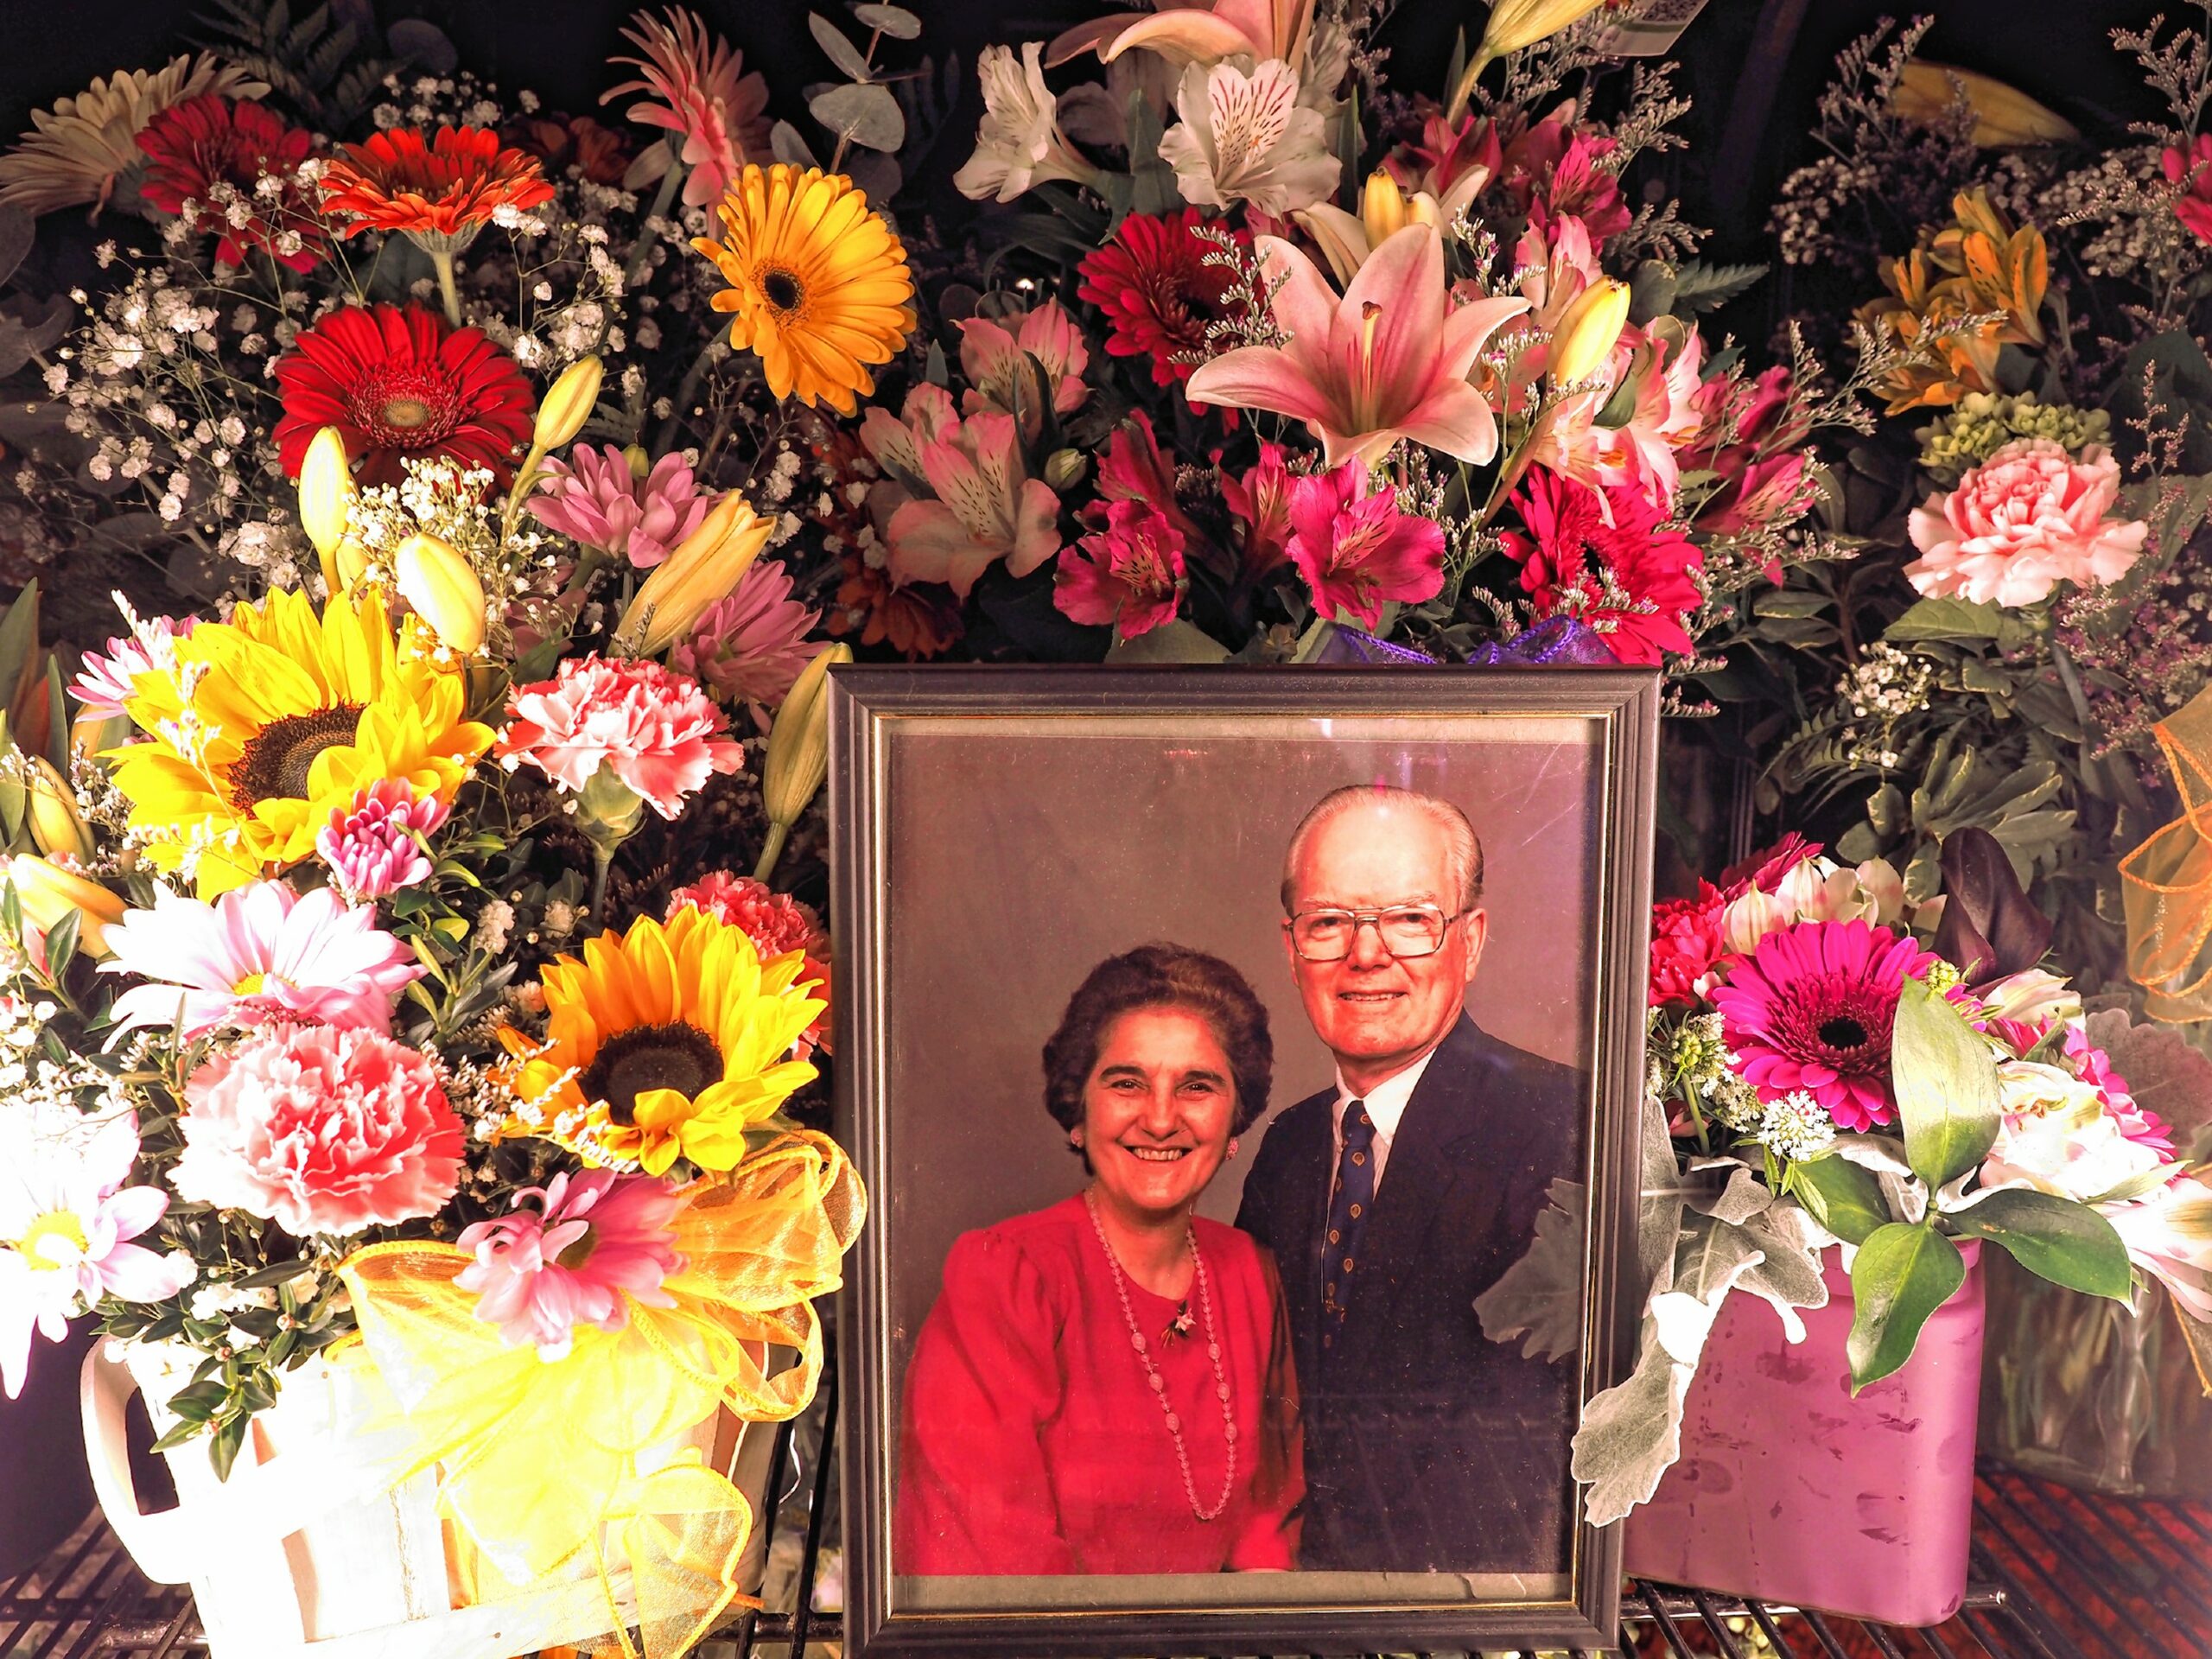 A thousand words: For florist, a shining example